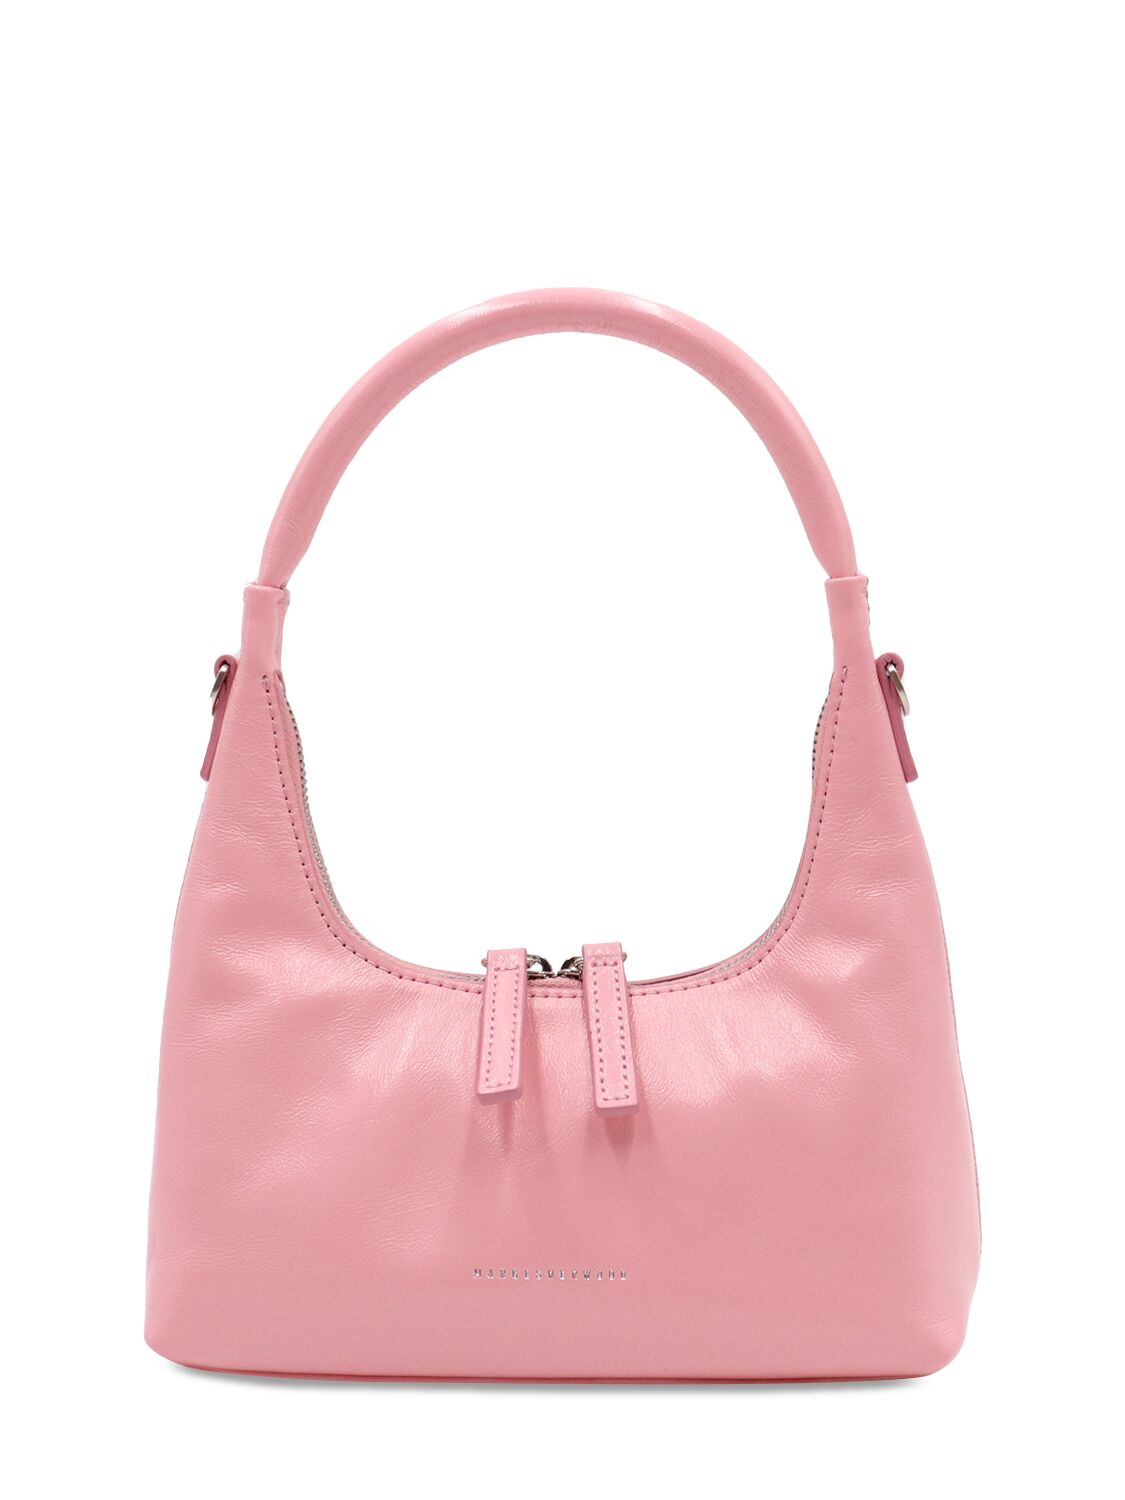 Marge Sherwood Mini Hobo Leather Bag W/strap In Candy Pink Glossy